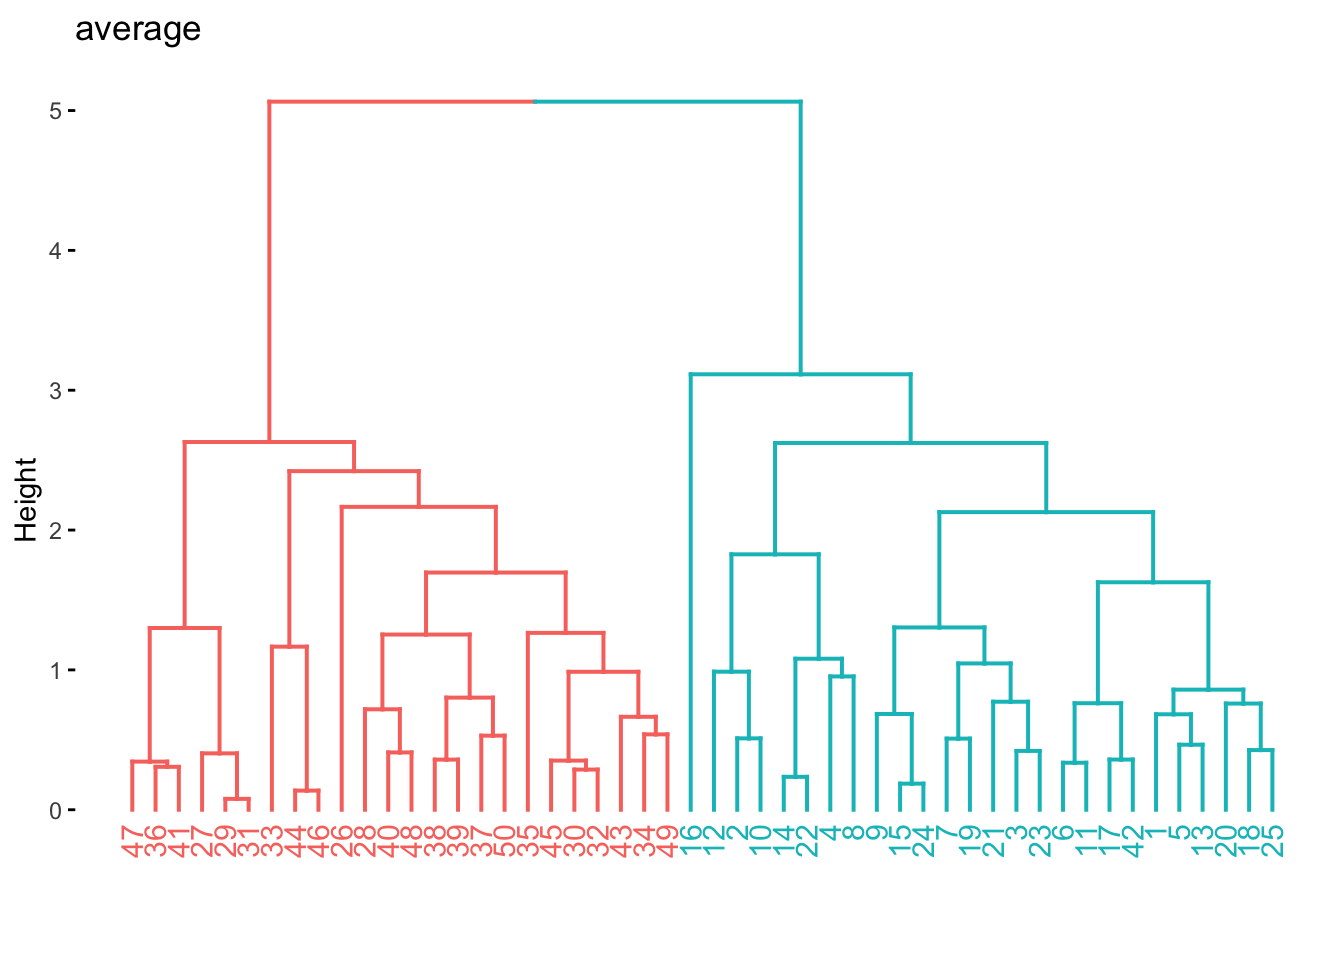 Dendrogram visualization. Both left and right side looks more or less even.